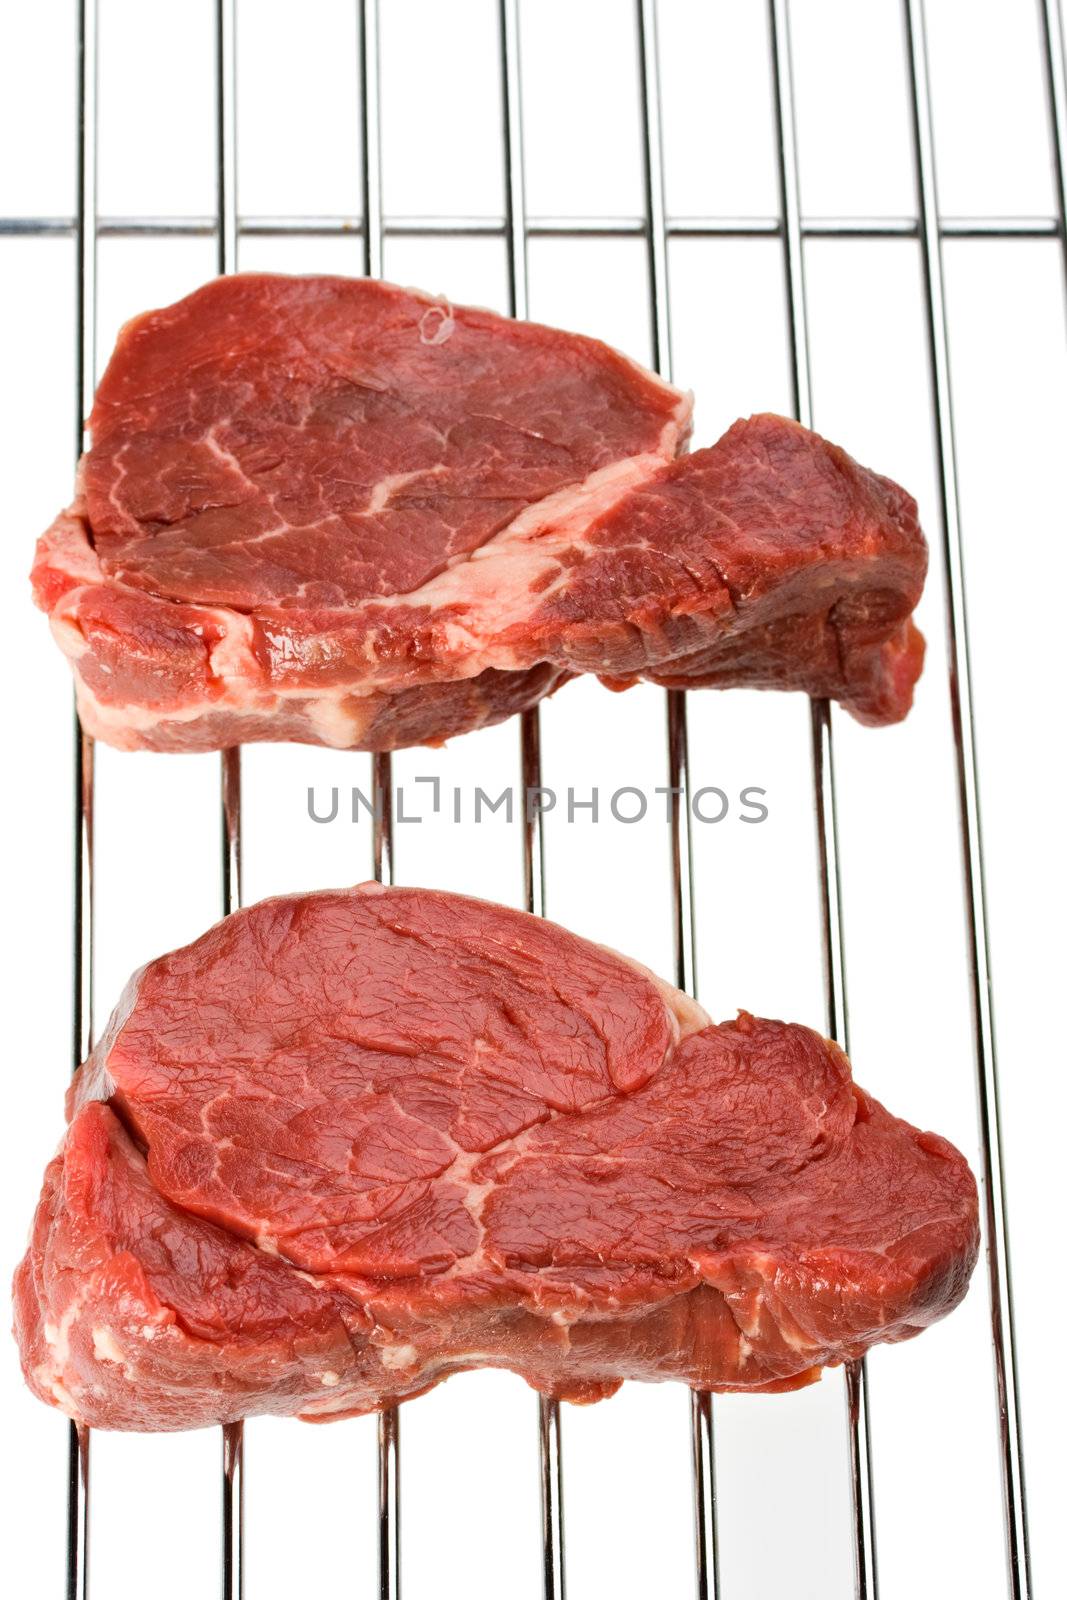 raw steak on a grill isolated on white